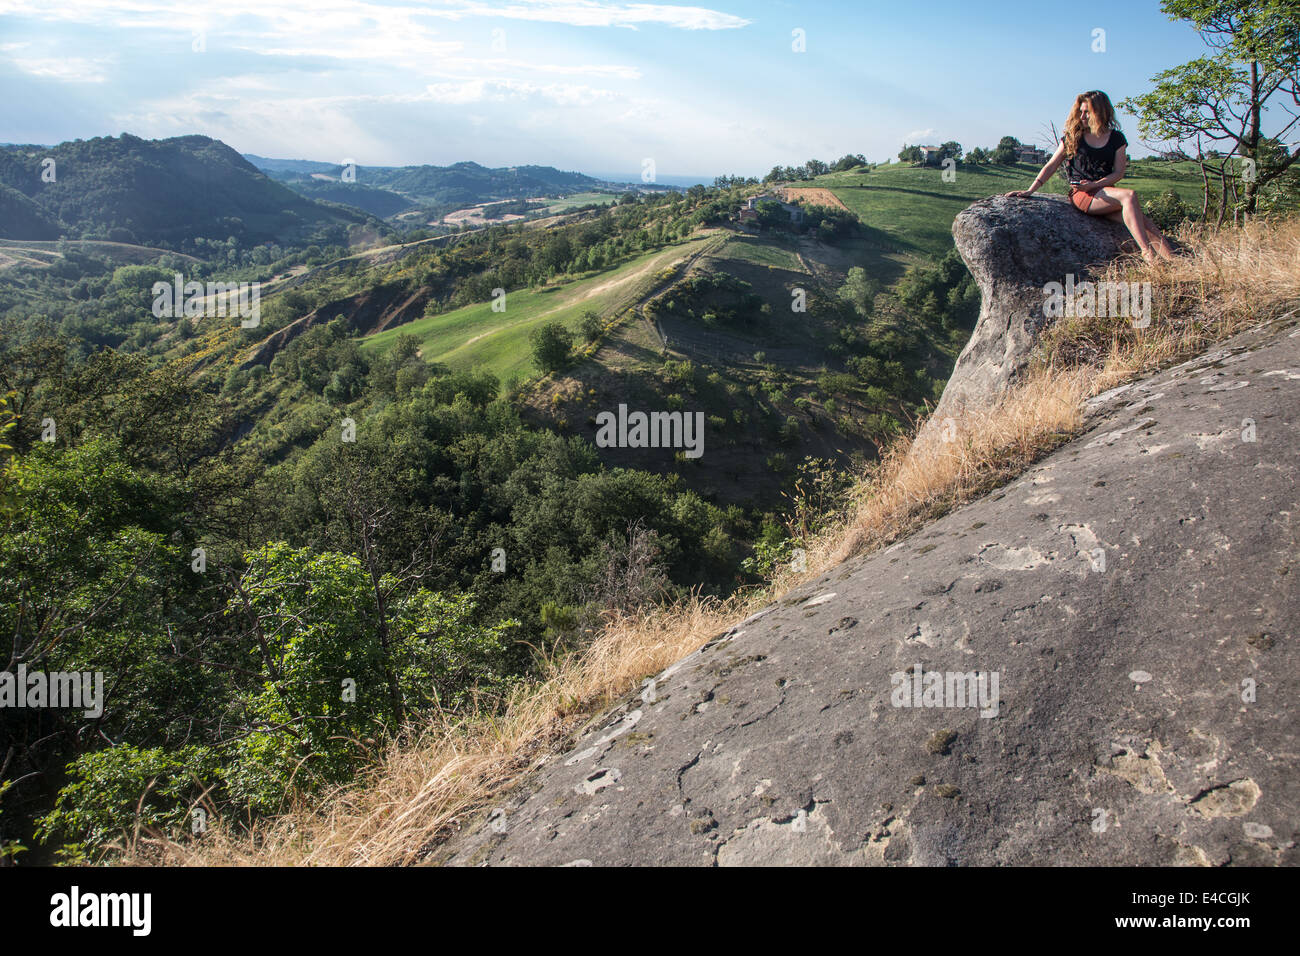 girl sitting on rock enjoying the view of the countryside Stock Photo